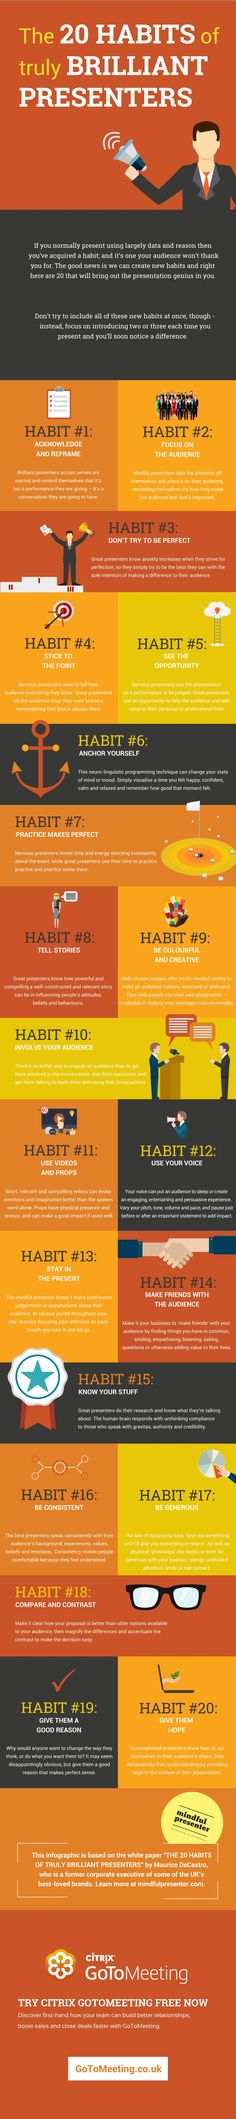 20 Habits ??f Truly Brilliant Presenters Infographic - <a href="http://elearninginfographics.com/20-habits-%ce%bff-truly-brilliant-presenters-infographic/" rel="nofollow" target="_blank">elearninginfograp...</a>